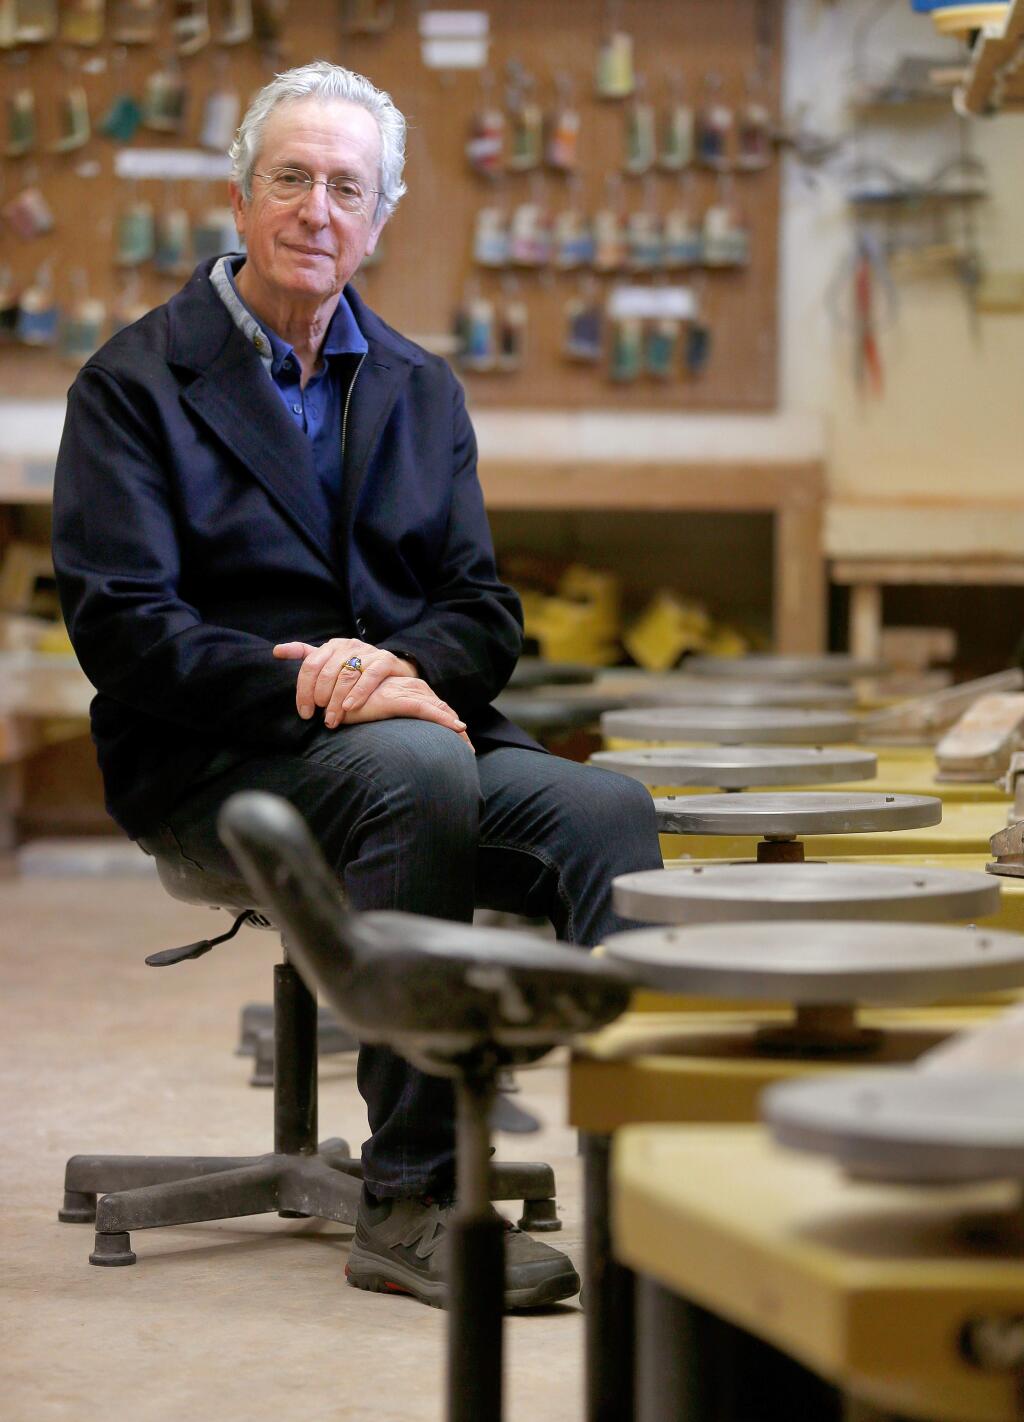 Robert Brent, board member of Sebastopol Center for the Arts and inventor of the Brent Pottery Wheel, poses for a portrait beside a row of his invention at Sebastopol Center for the Arts, in Sebastopol, California on Friday, January 5, 2018. (Alvin Jornada / The Press Democrat)